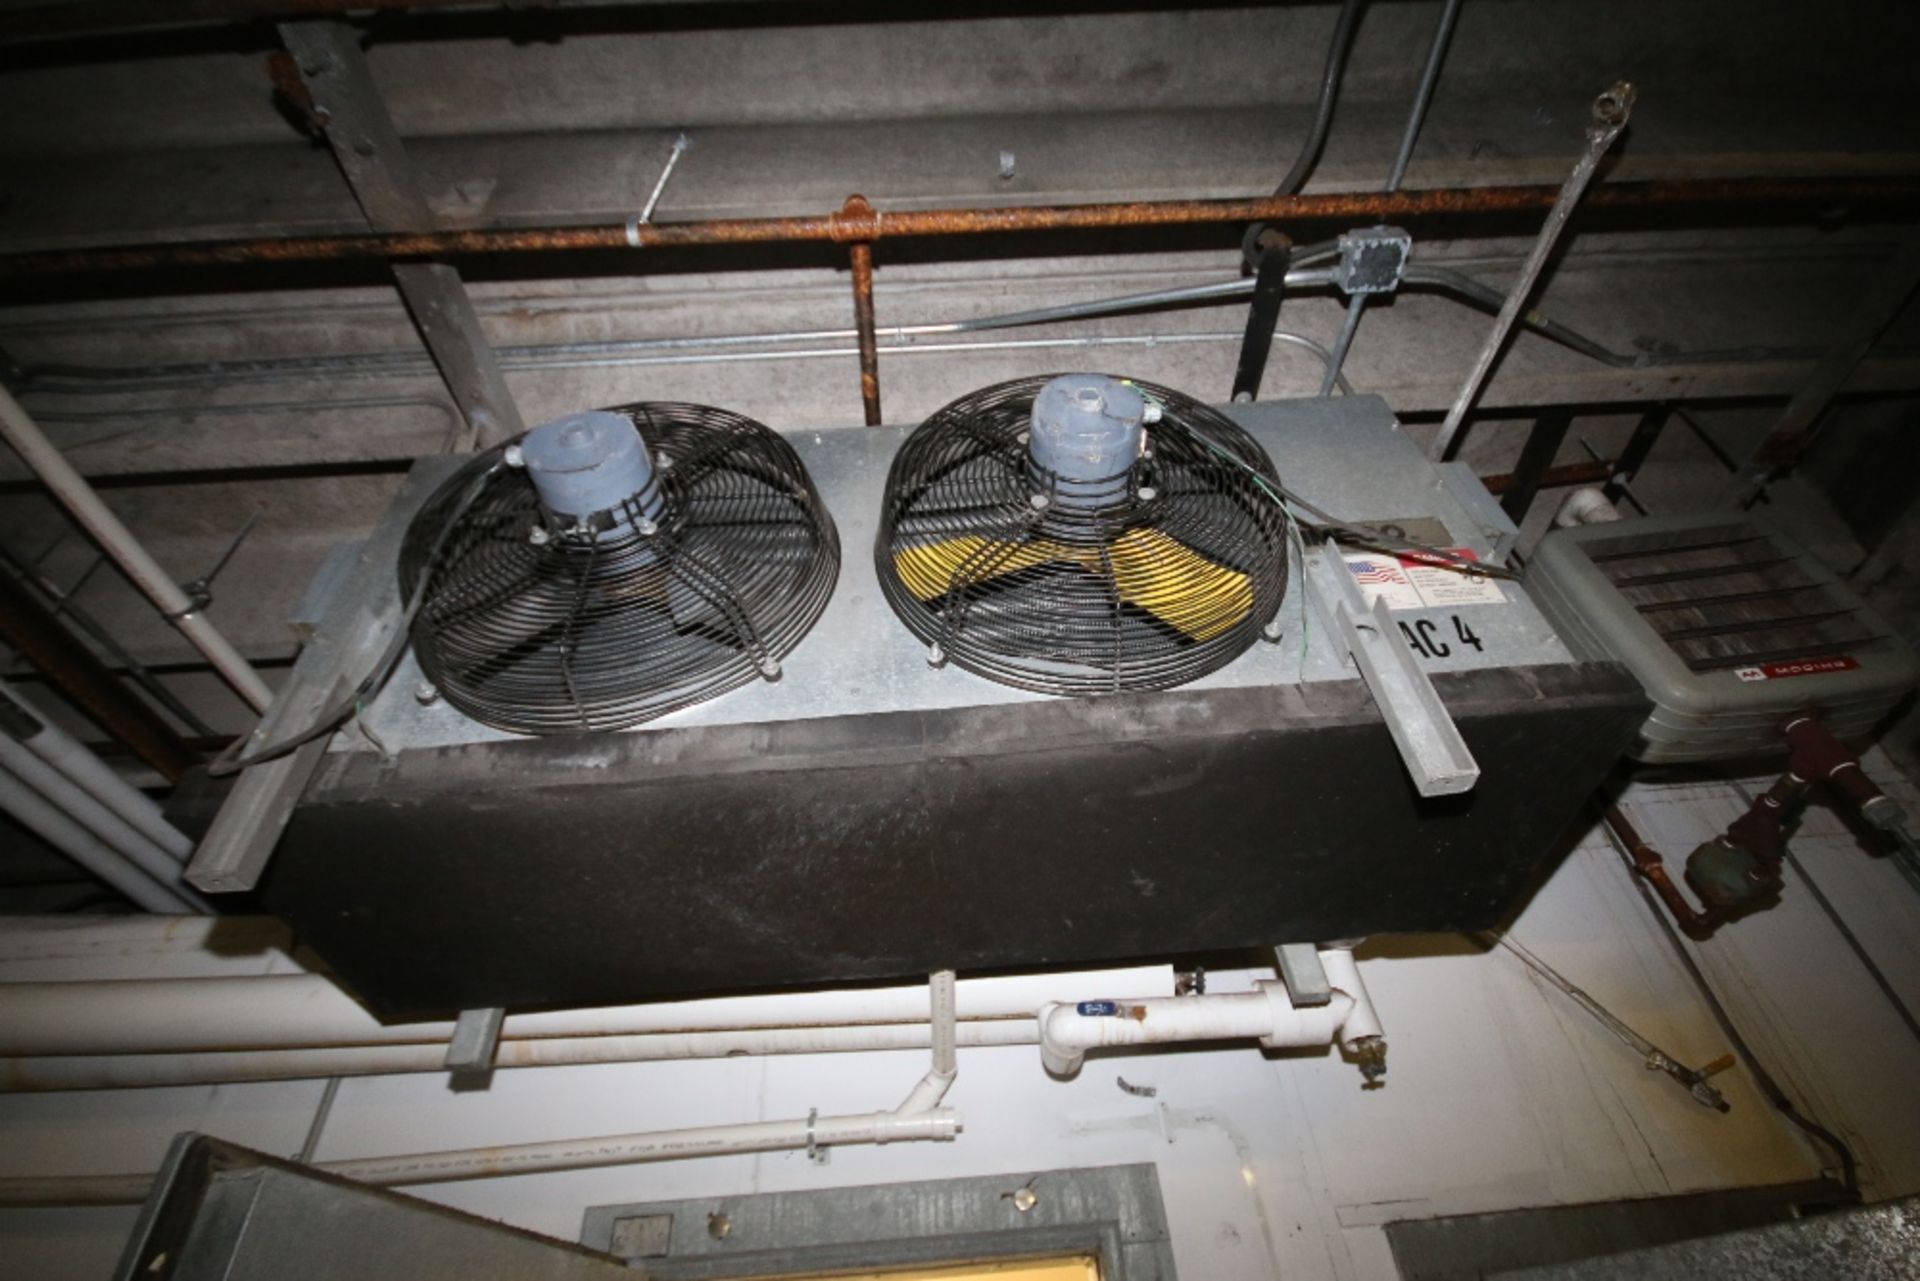 Imeco/Frigid-Coil Evaporator Blowers, (2) 2-Fan, Model GPX235-450, S/N 2343-1LH (Unit AC2) and Model - Image 5 of 6